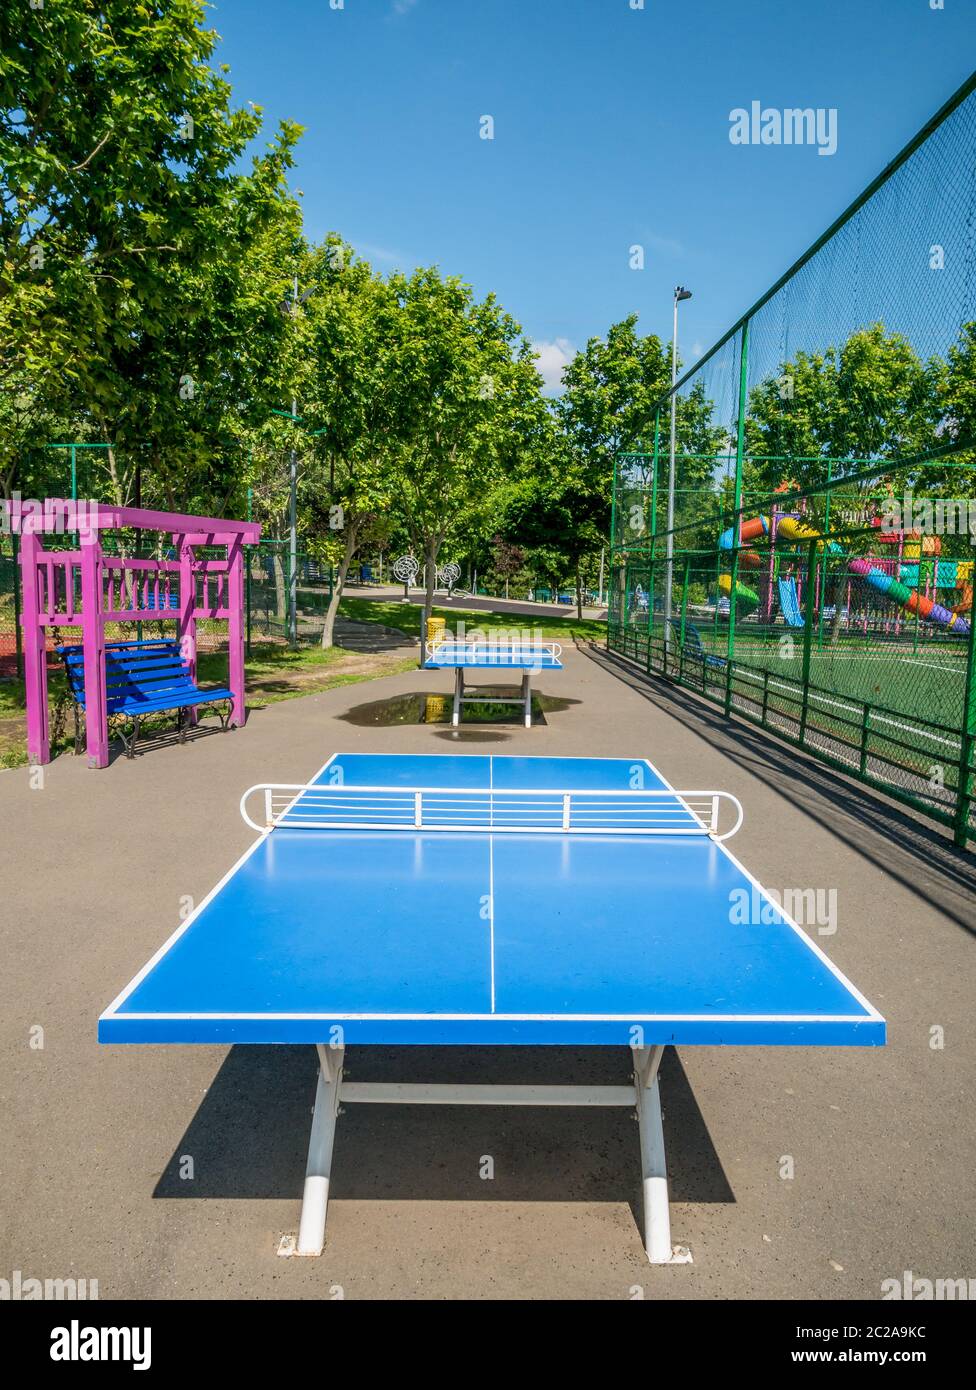 Empty park with blue ping pong table or tennis tables Stock Photo - Alamy